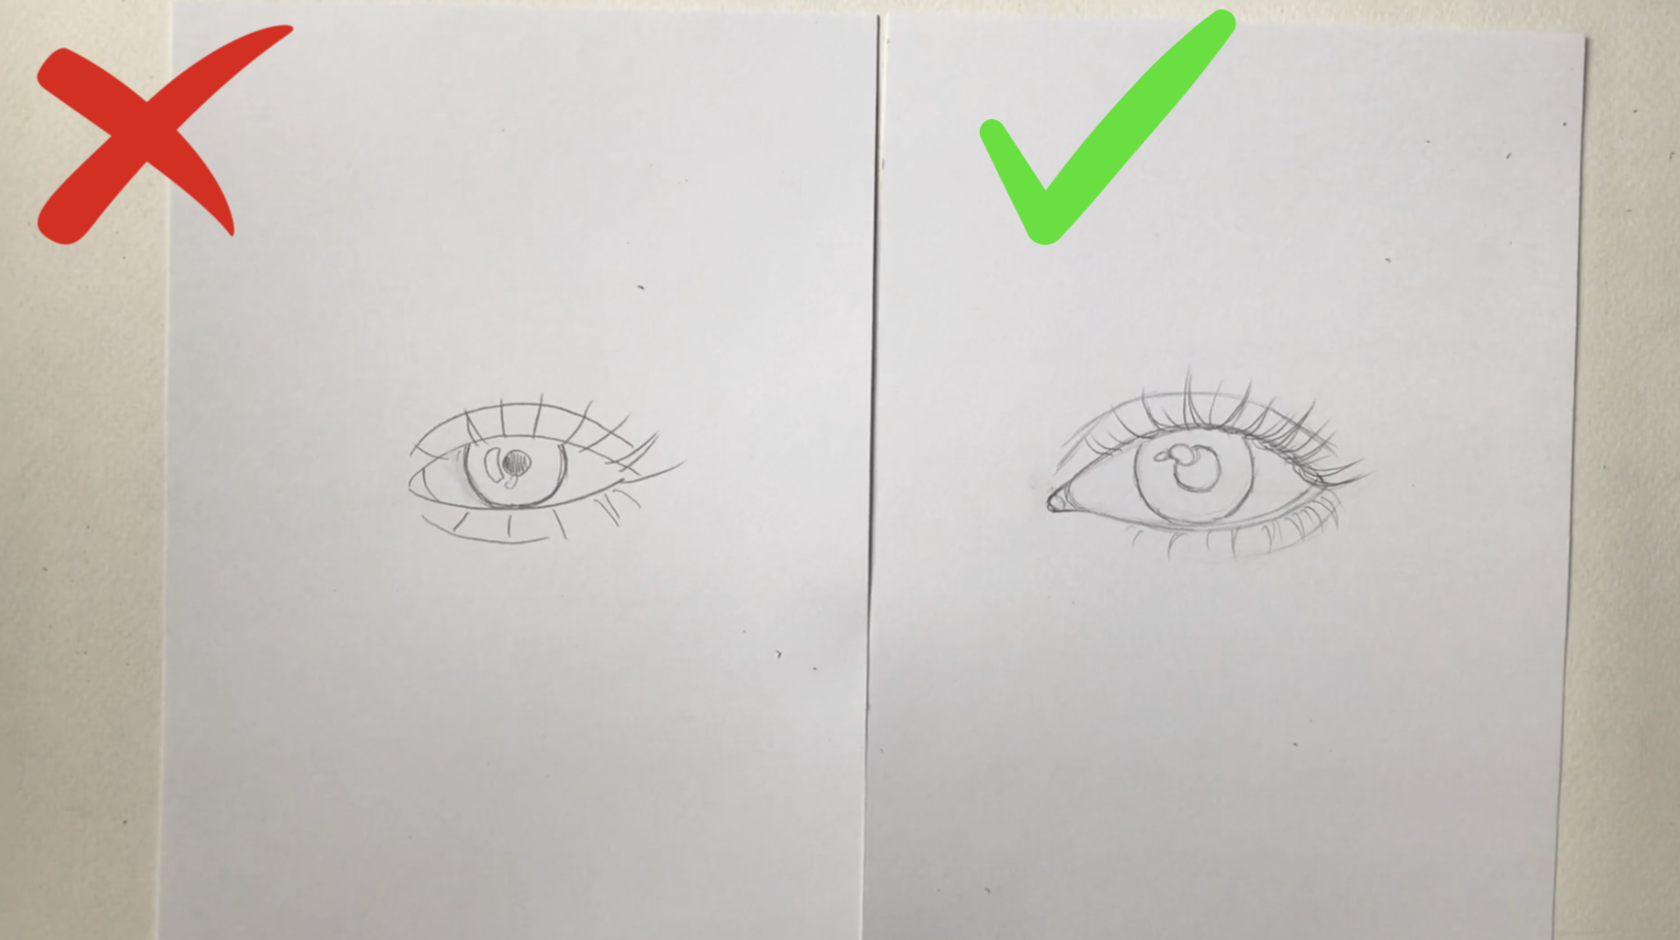 How to add lashes to eyes?